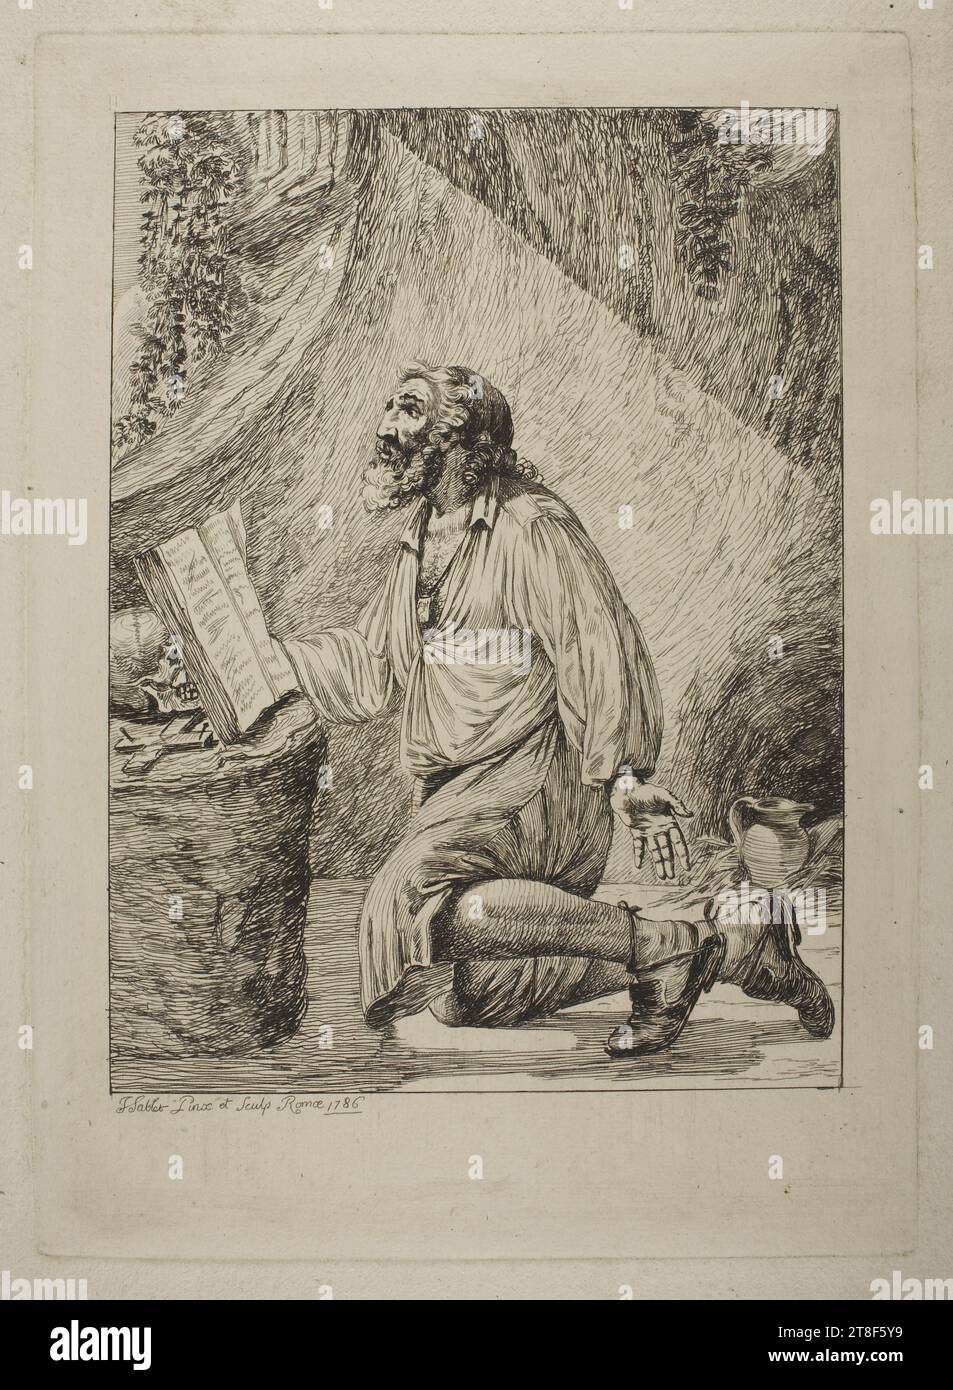 Praying Hermit, Jacques-Henri Sablet, 1786, Graphic Art, Etching, Paper, Color, Printer's ink, Etching, Printet, Height (plate size) 280 mm, Height (paper size) 353 mm, Width (plate size) 200 mm, Width (paper size) 260 mm, F. Sablet Pinx et Sculp. Romæ 1786, Graphic Design, European, Enlightenment (1690 - 1800 Stock Photo